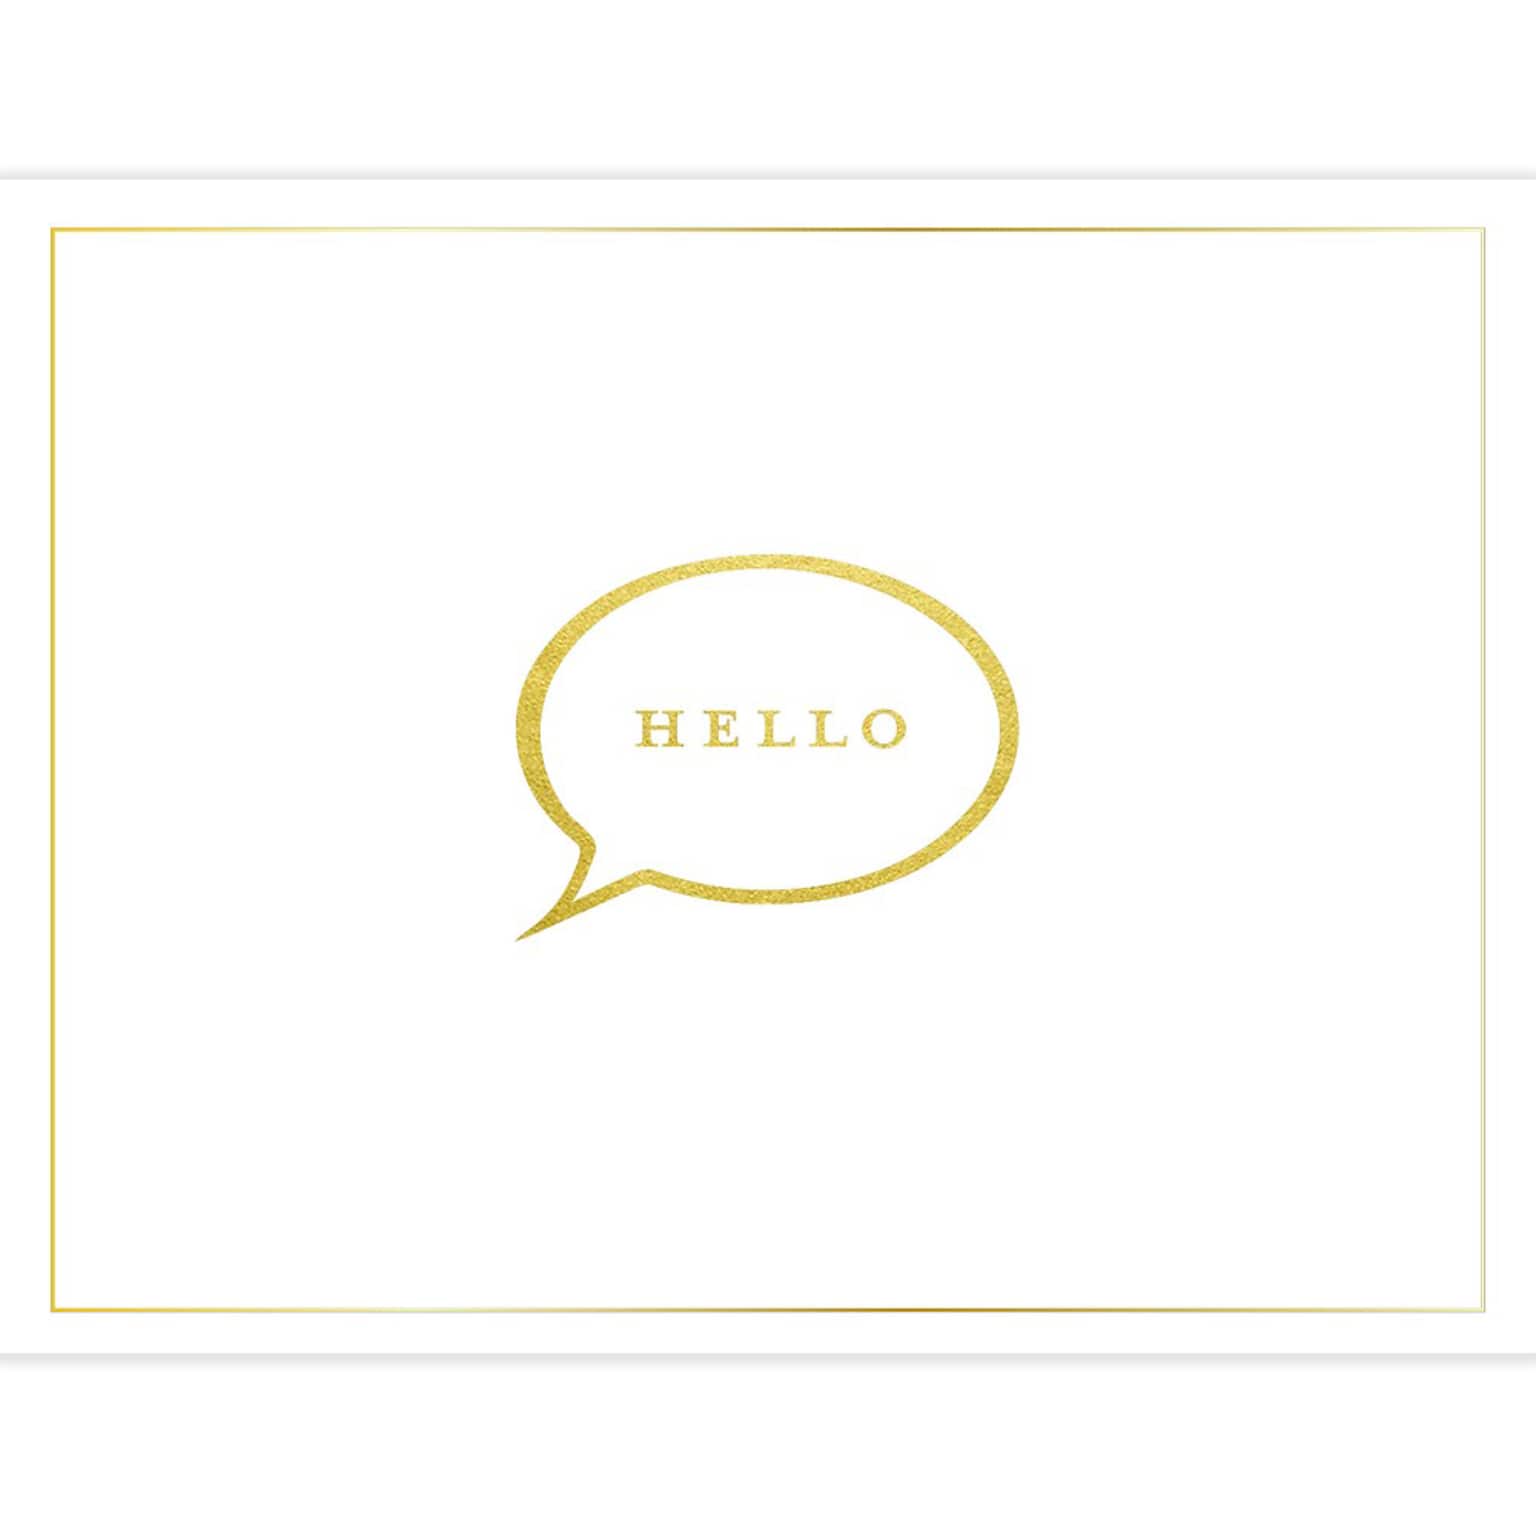 JAM Paper® Premium Blank Note Card Sets, 3 7/8 x 5, Hello in Bubble, 12 Cards & Envelopes (526836000)